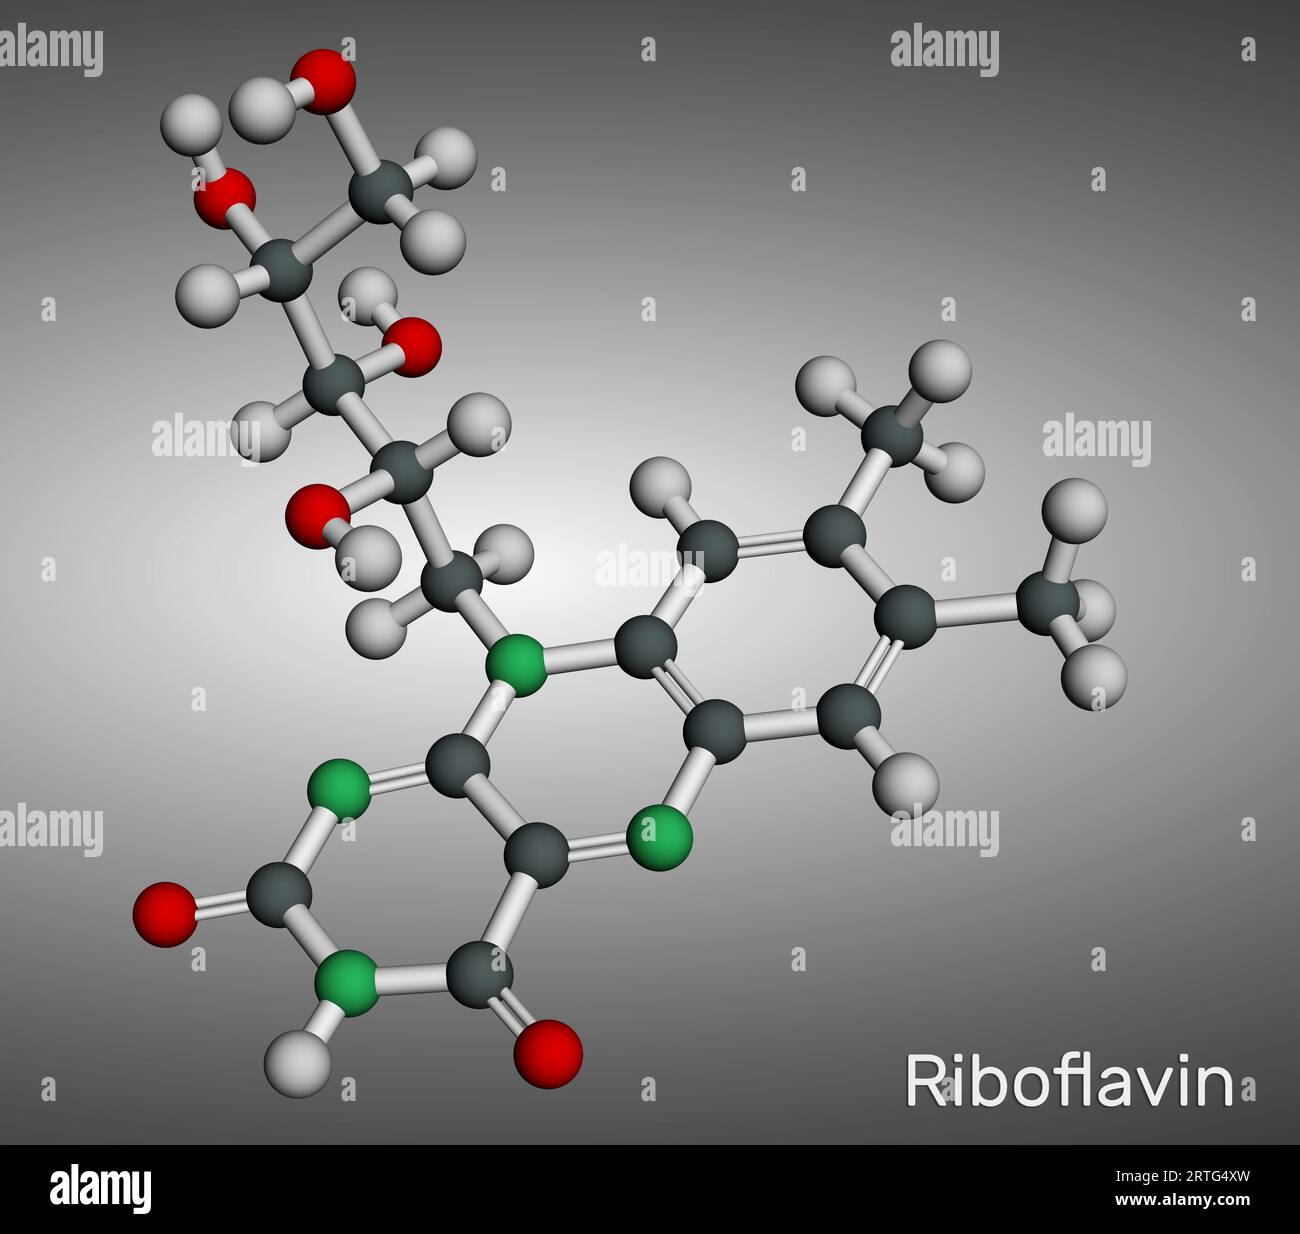 Riboflavin, vitamin B2 molecule. It is water-soluble flavin, is found in food, used as a dietary supplement E101. Molecular model. 3D rendering. Illus Stock Photo